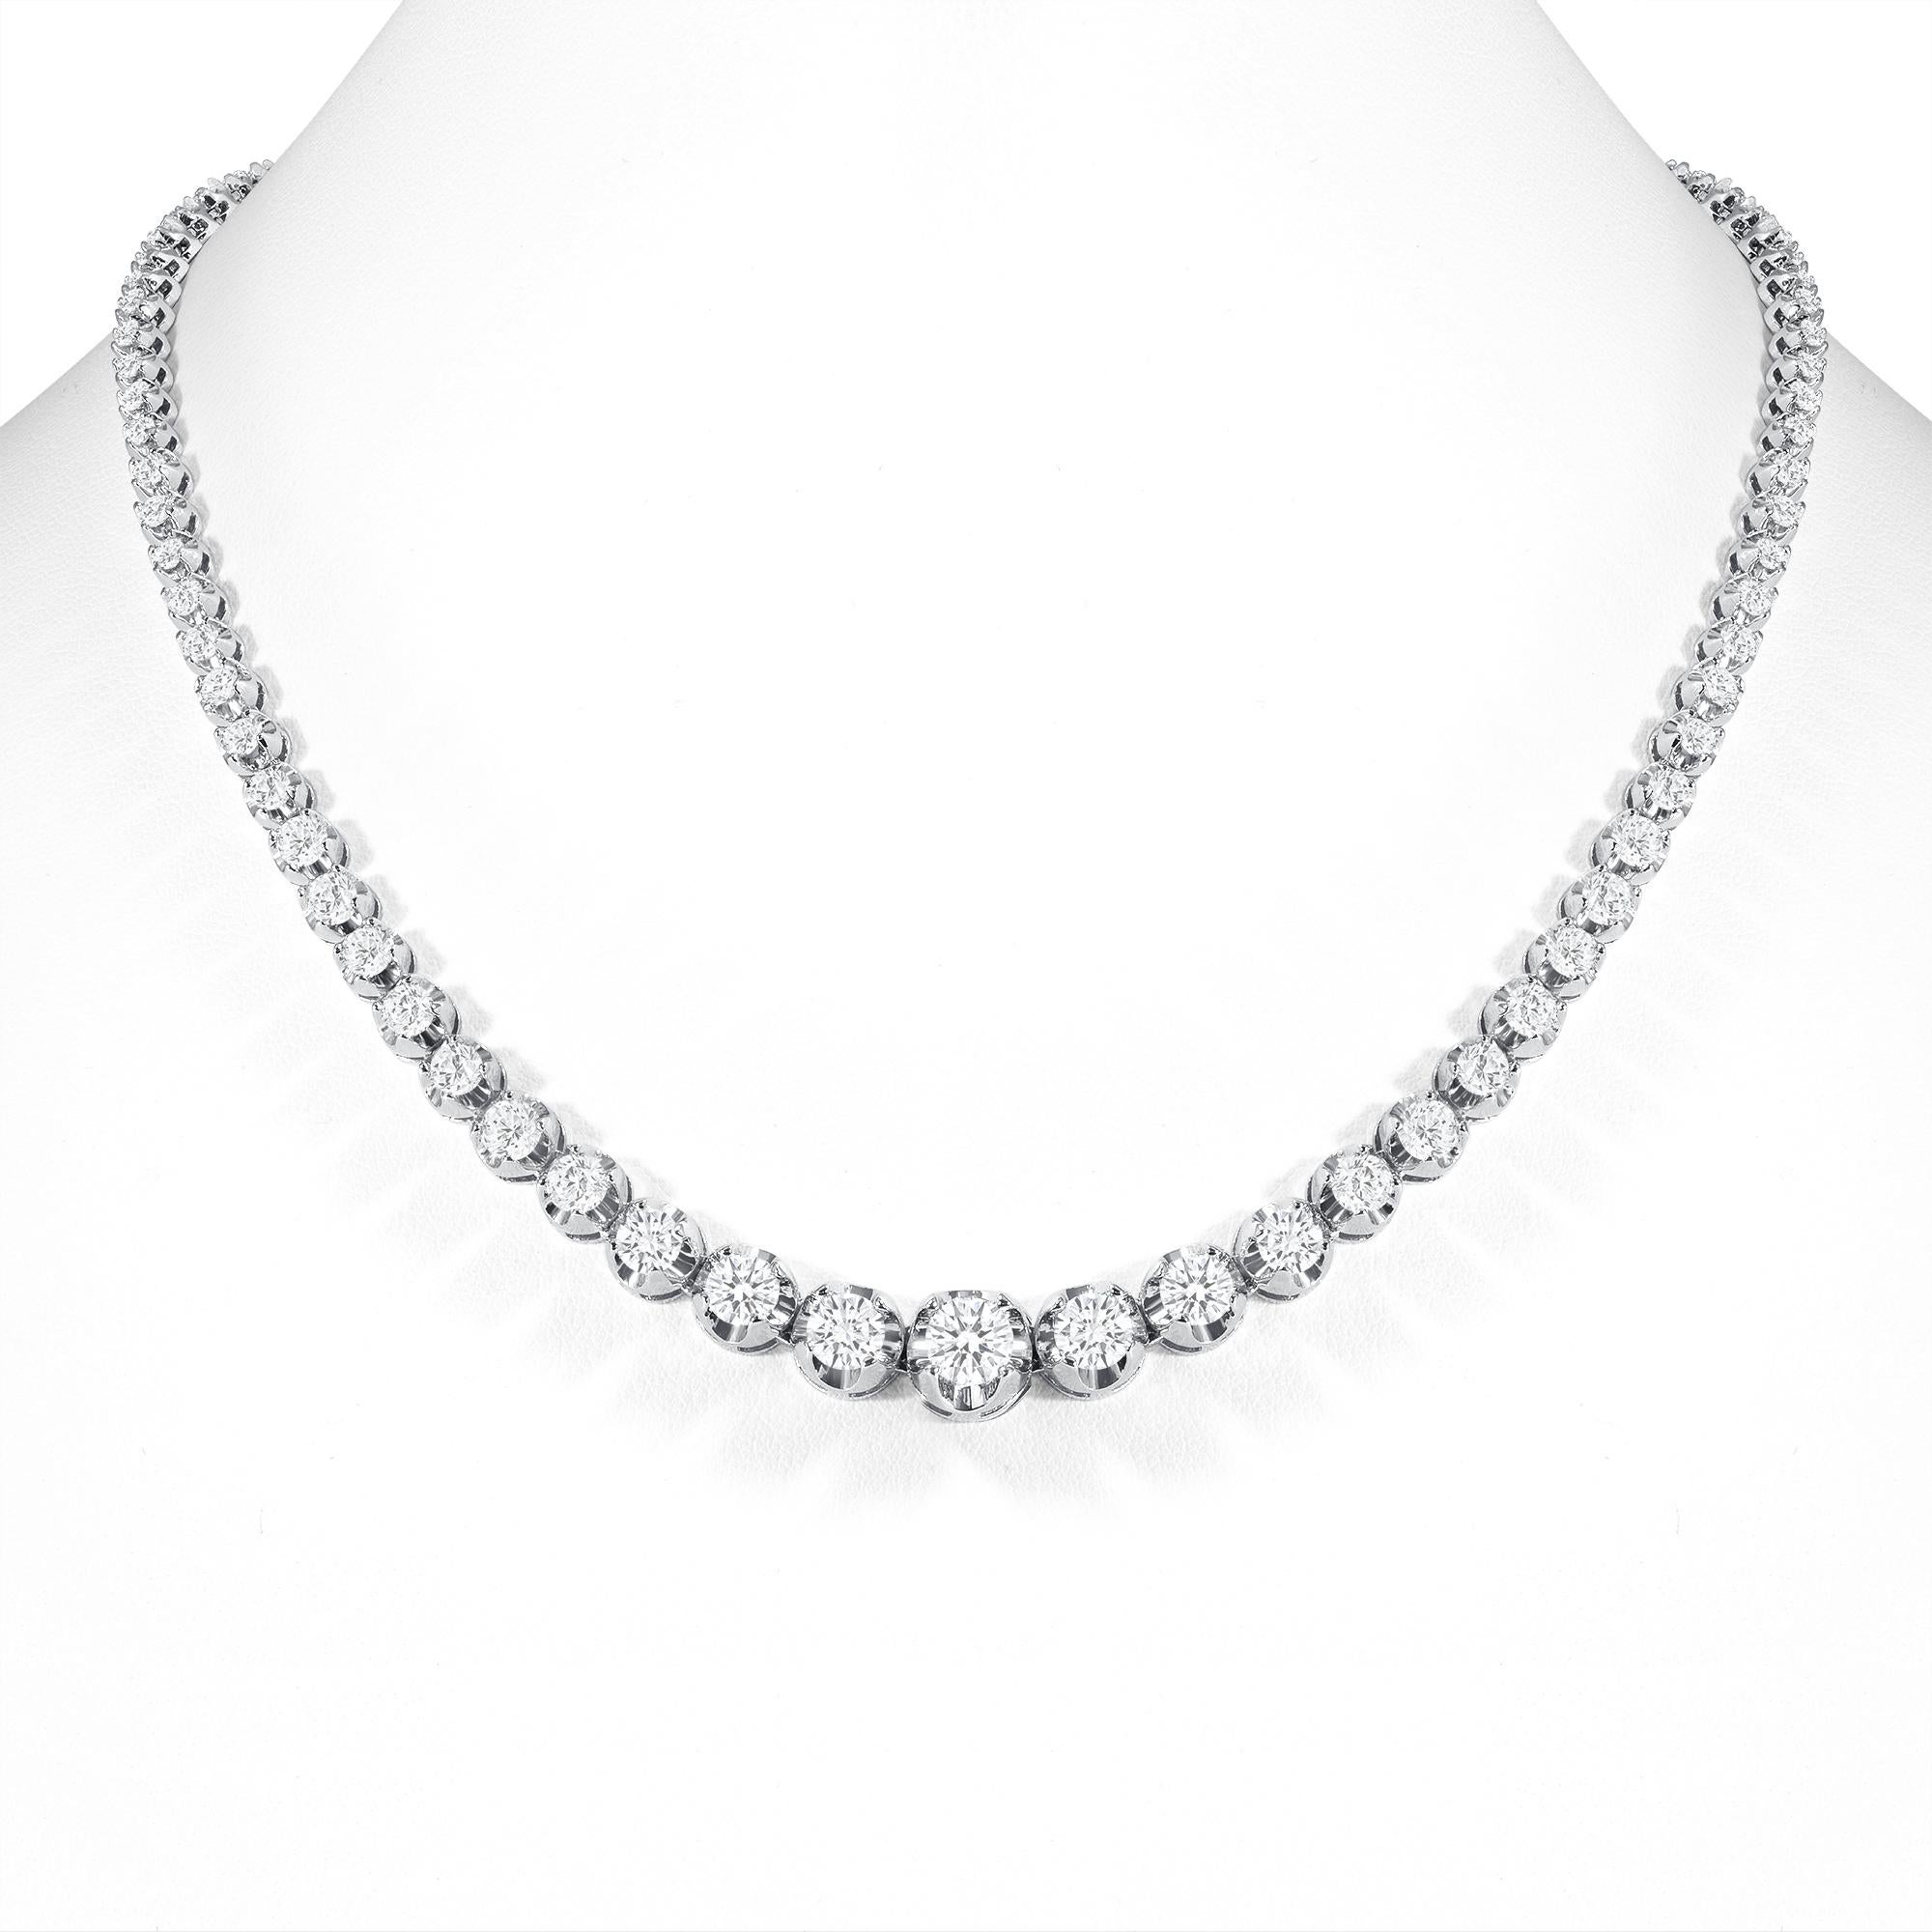 This finely made graduated necklace with beautiful round diamonds sits elegantly on any neck. 

Metal: 14k Gold
Diamond Cut: Round
Total Diamond Approx. Carats:  10ct
Diamond Clarity: VS
Diamond Color: F-G
Size: 20 inches
Color: White Gold
Included